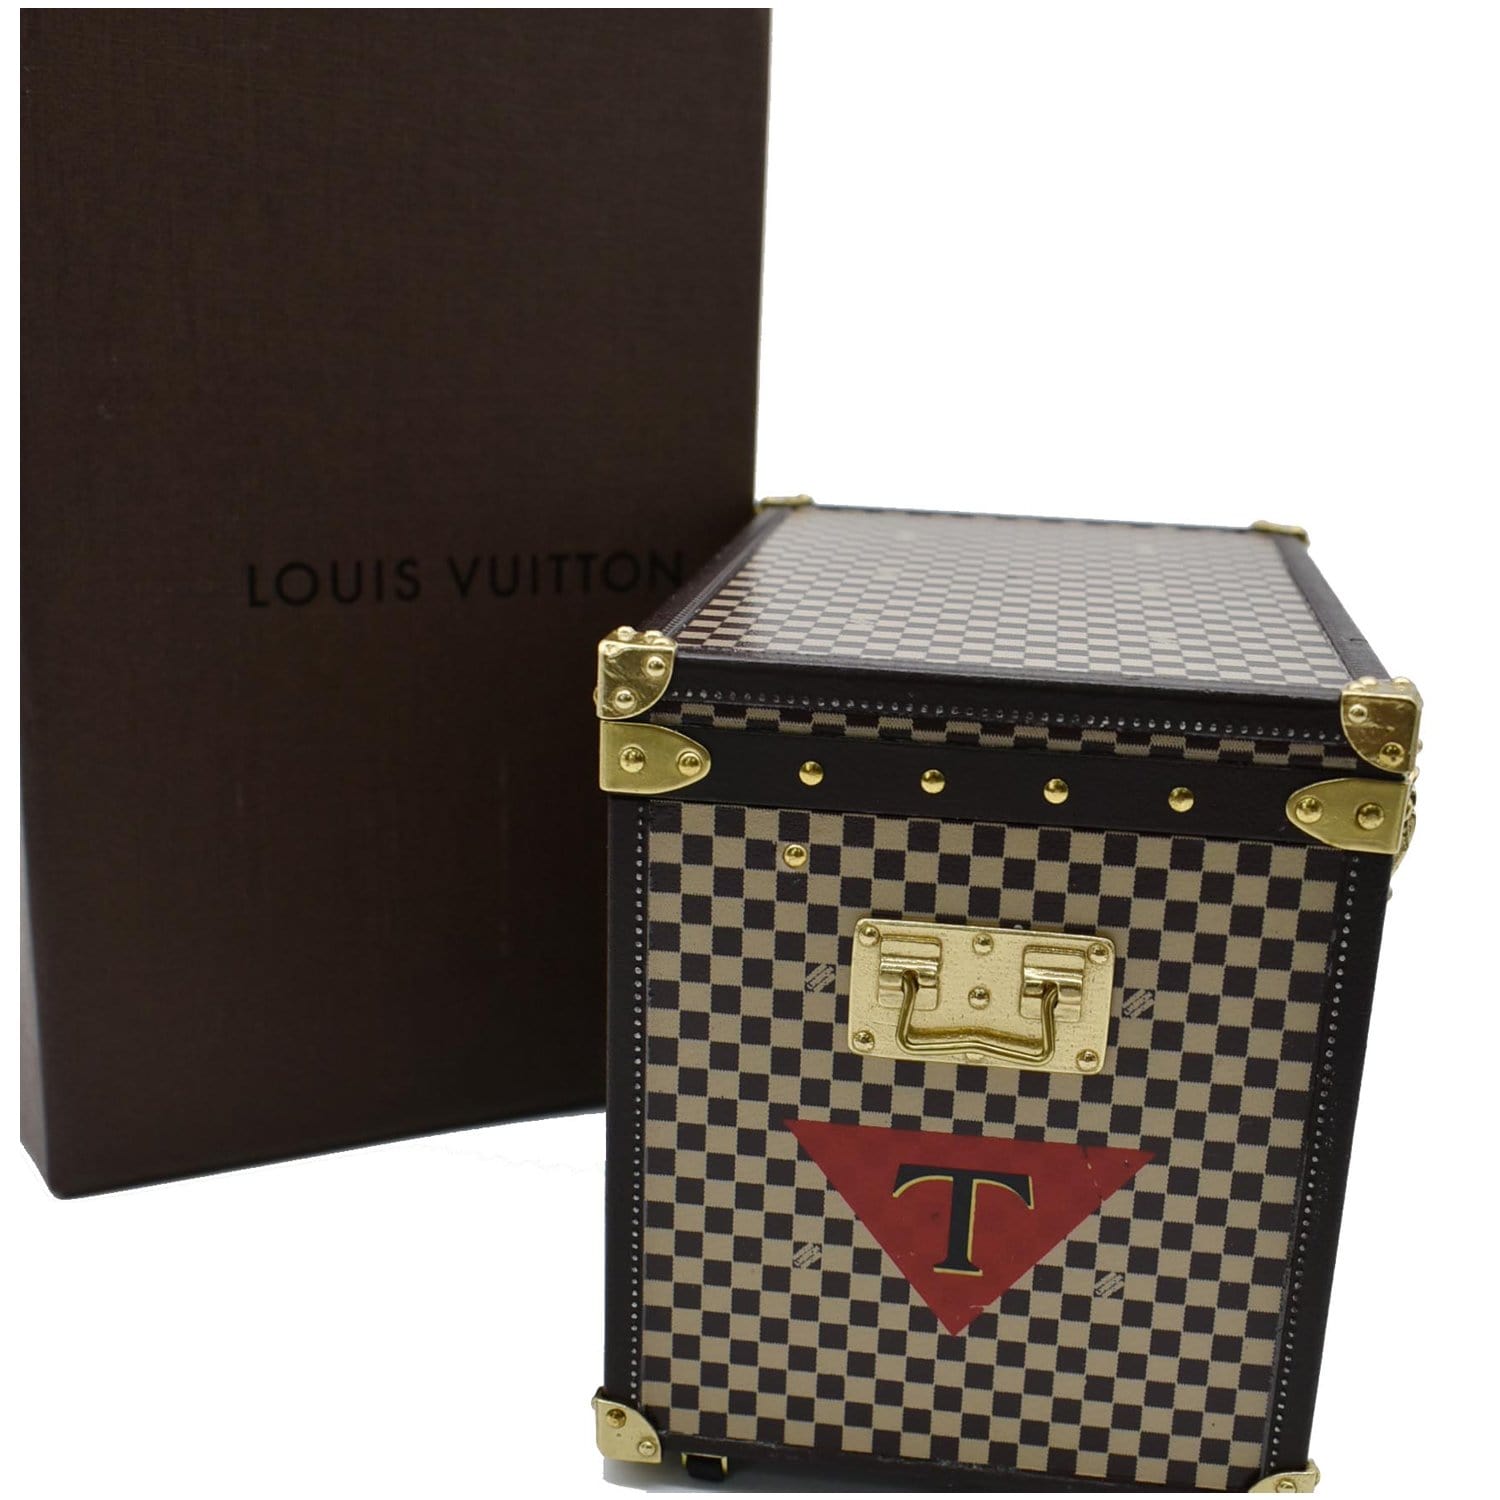 louis vuitton jewelry packaging